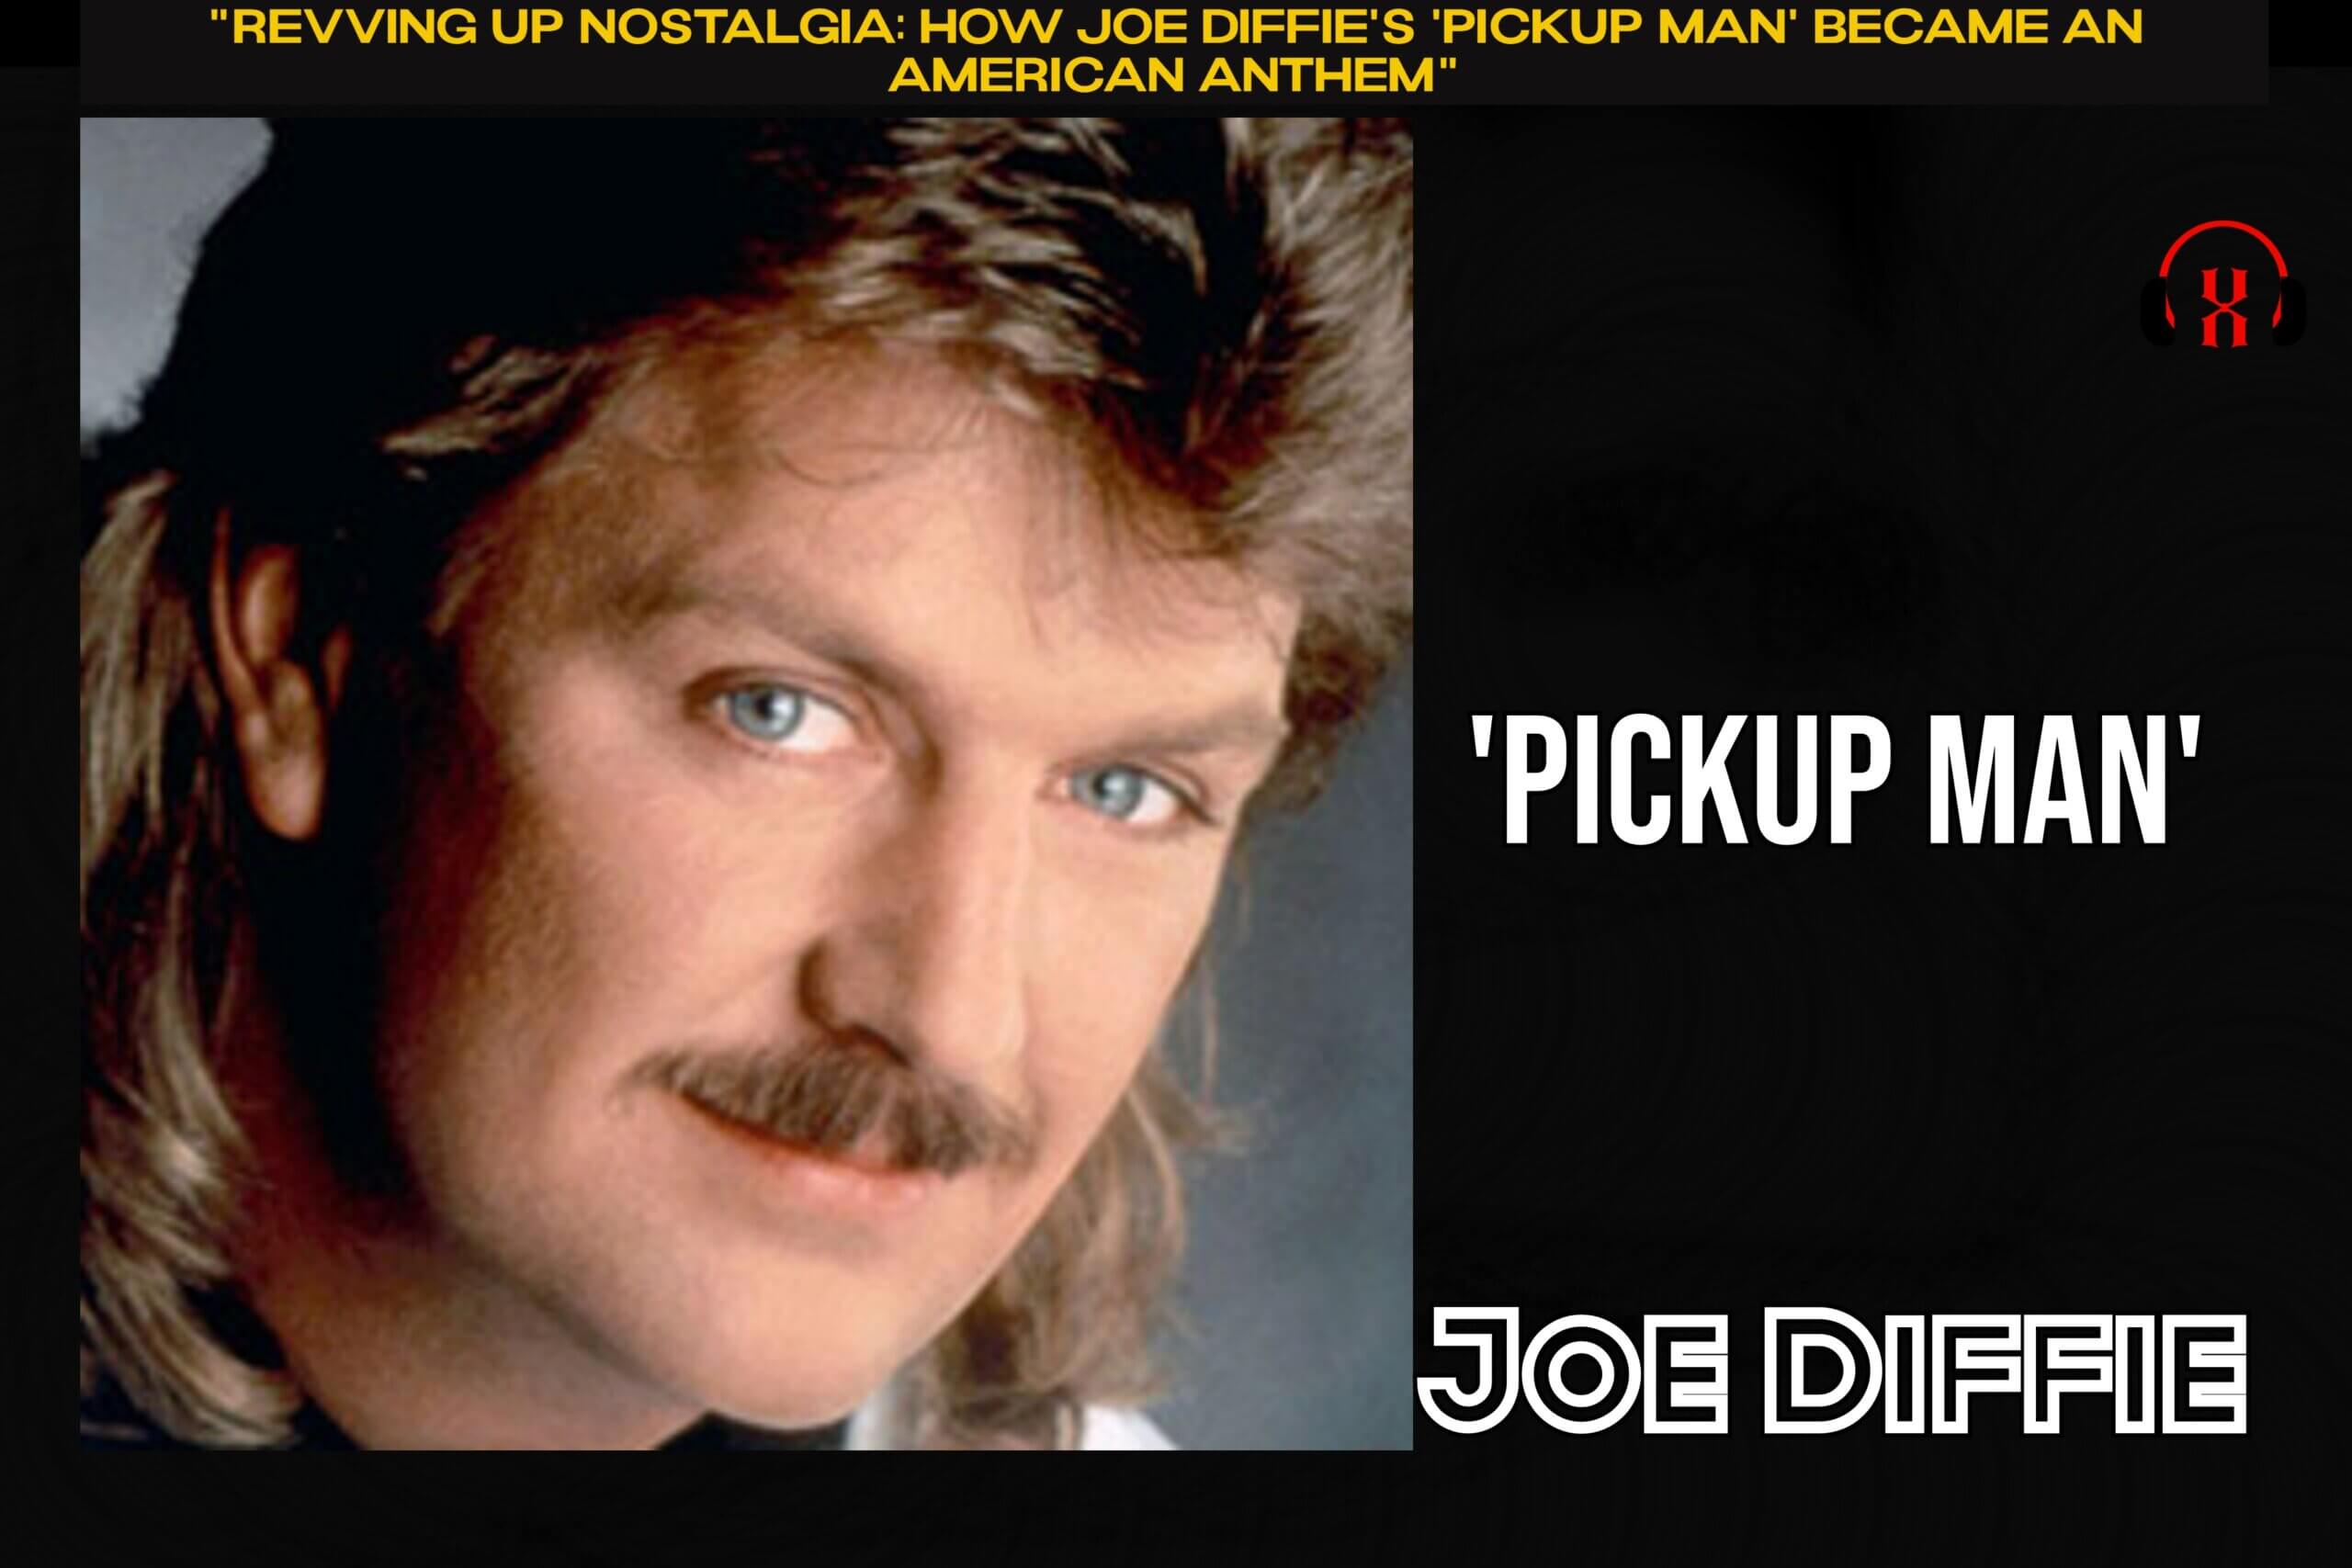 "Revving Up Nostalgia: How Joe Diffie's 'Pickup Man' Became an American Anthem"